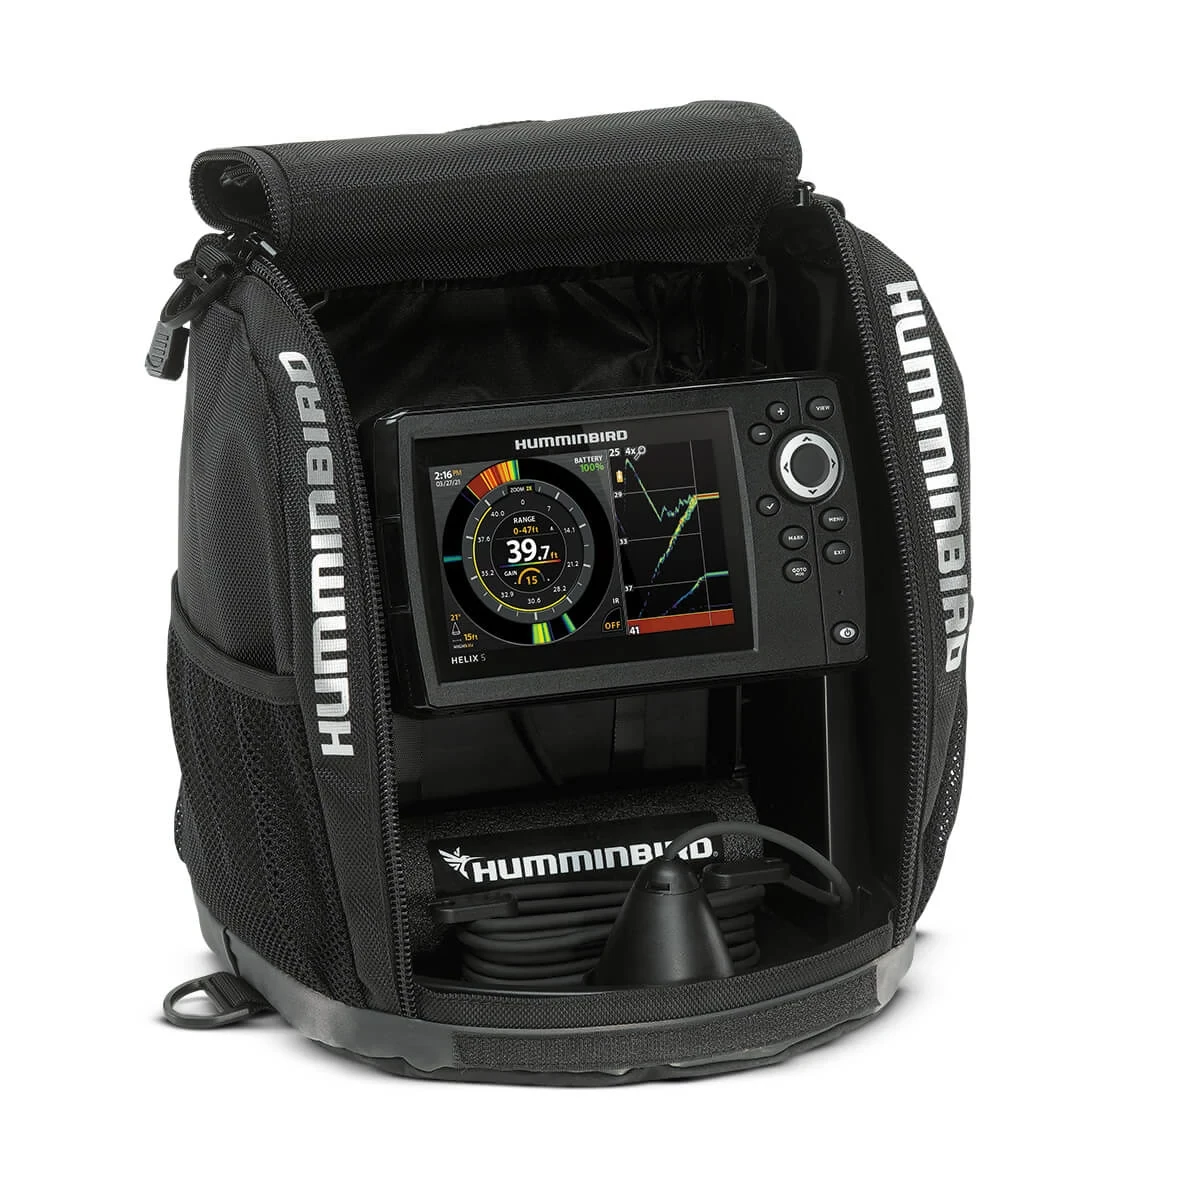 ICE HELIX 5 CHIRP GPS G3 shown at a wide, side angle with transducer tucked into the built-in tray in the shuttle